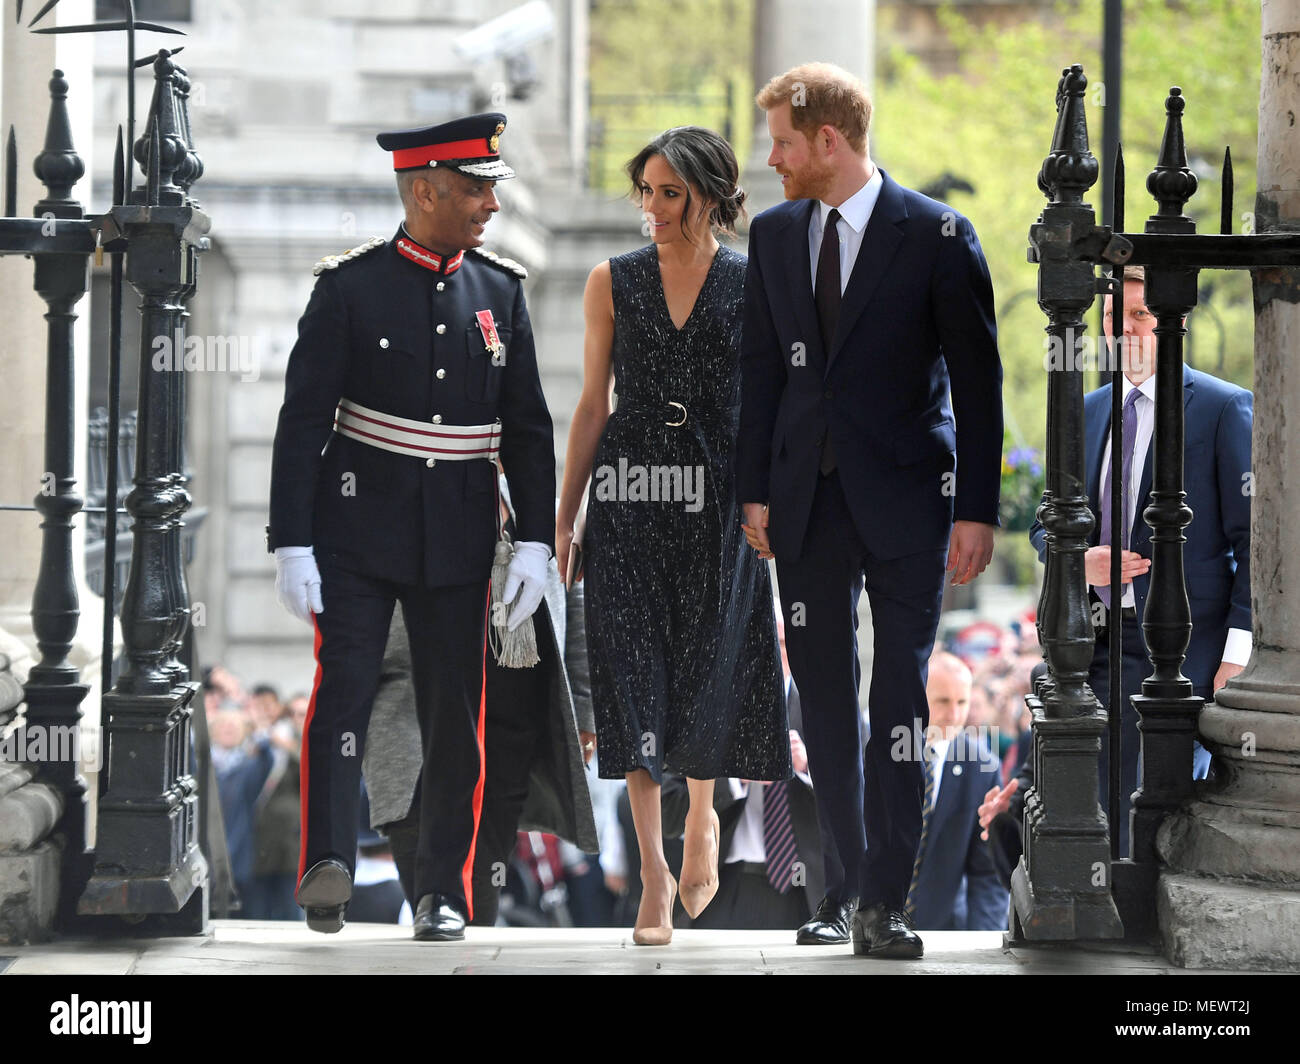 Prince Harry and Meghan Markle arrive at a memorial service at St Martin-in-the-Fields in Trafalgar Square, London, to commemorate the 25th anniversary of the murder of Stephen Lawrence. Stock Photo